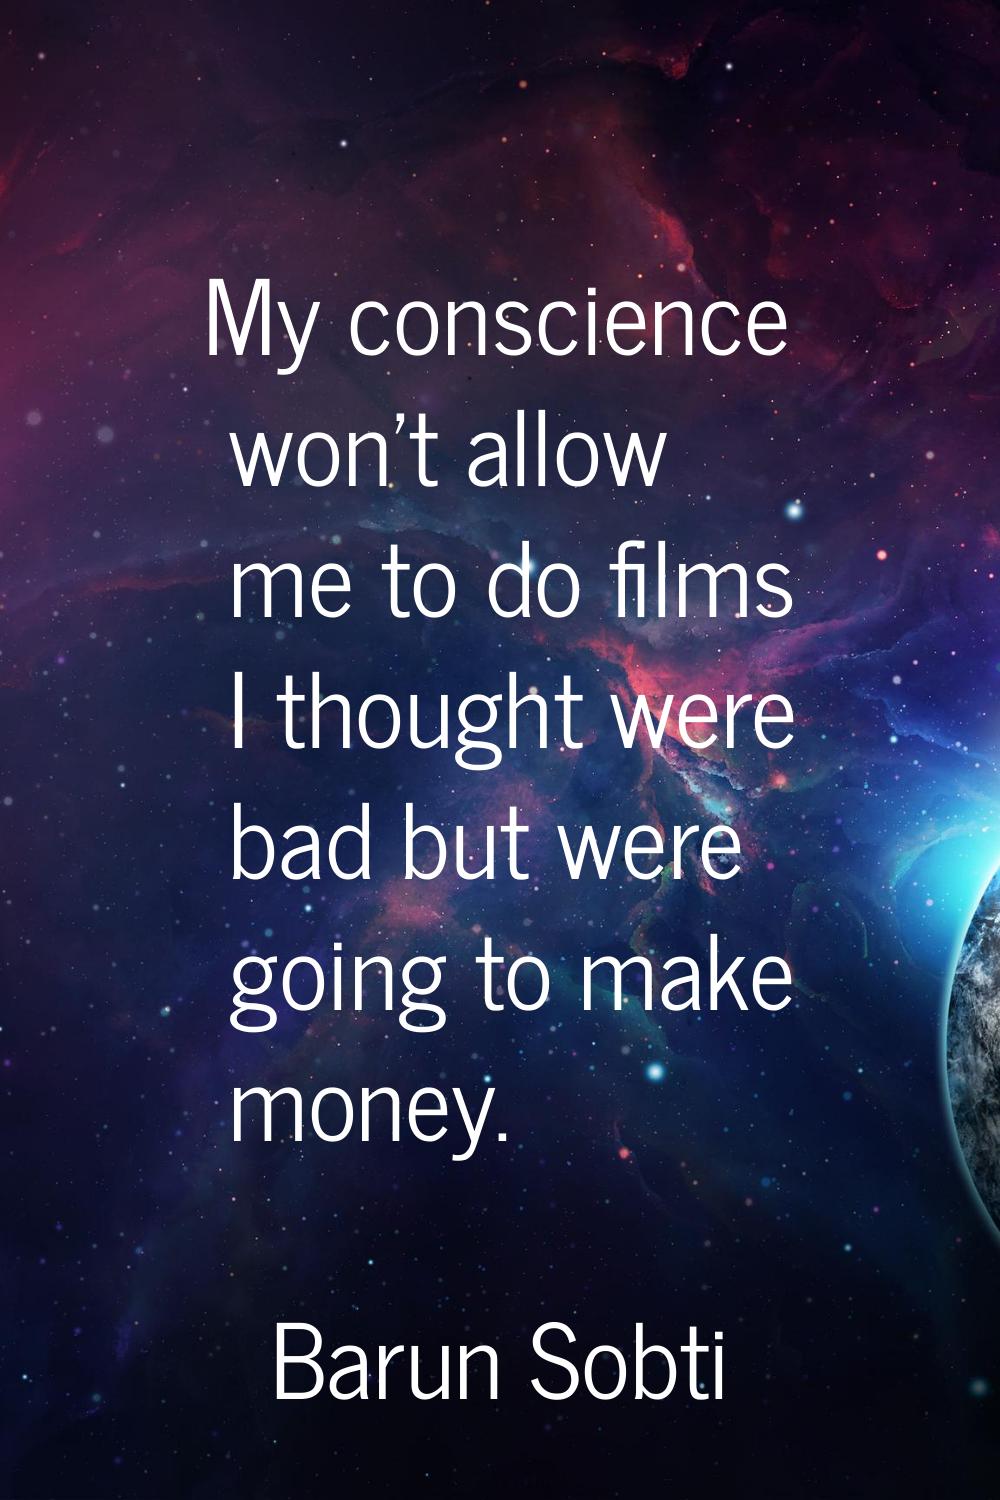 My conscience won't allow me to do films I thought were bad but were going to make money.